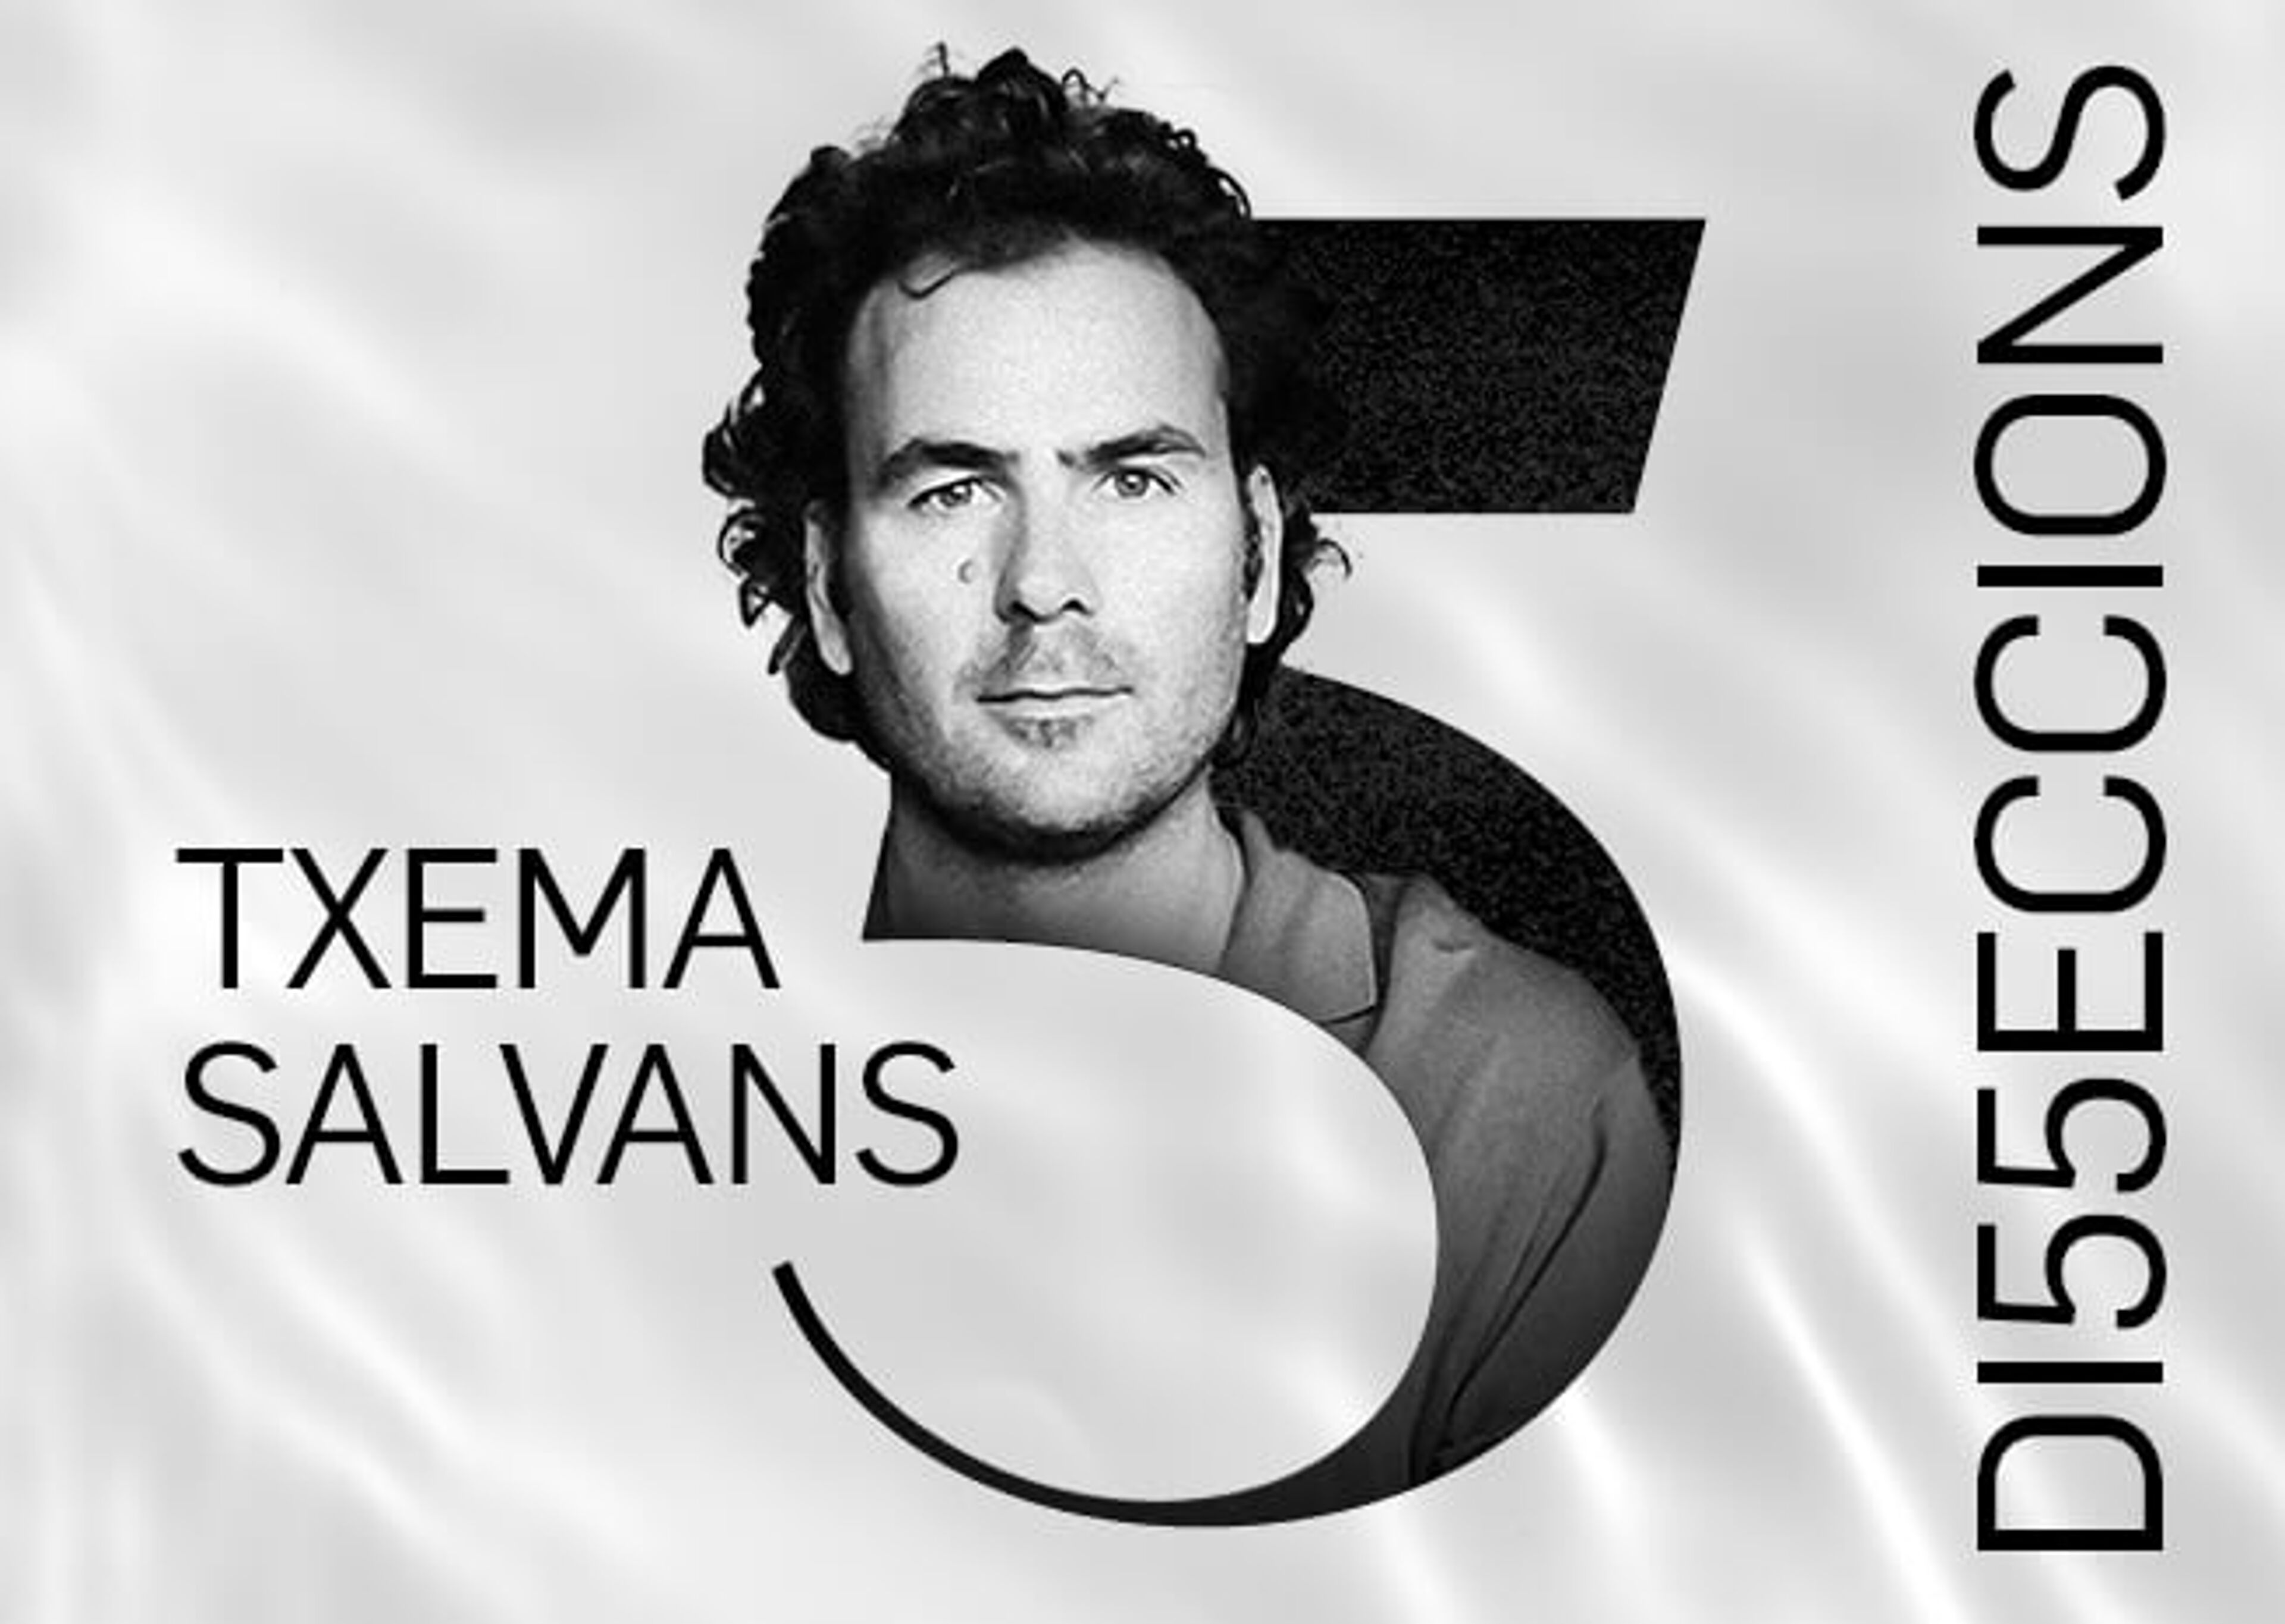 A monochrome portrait of a curly-haired man overlaid with bold typography and a large number '5' design.